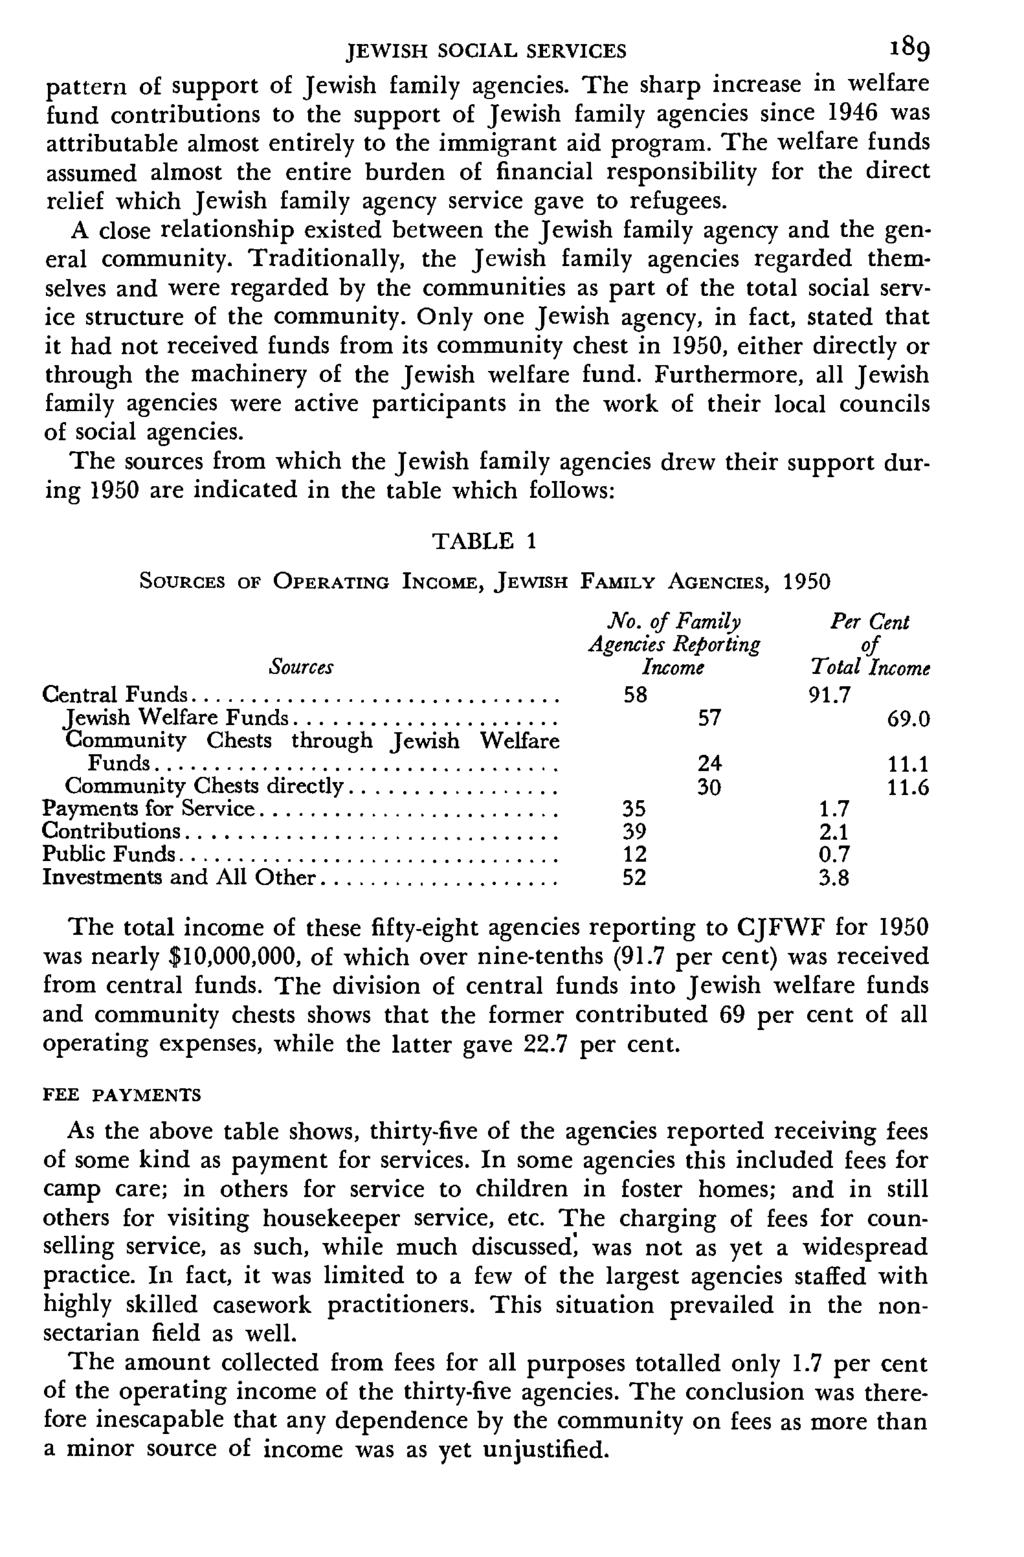 JEWISH SOCIAL SERVICES l8o, pattern of support of Jewish family agencies.